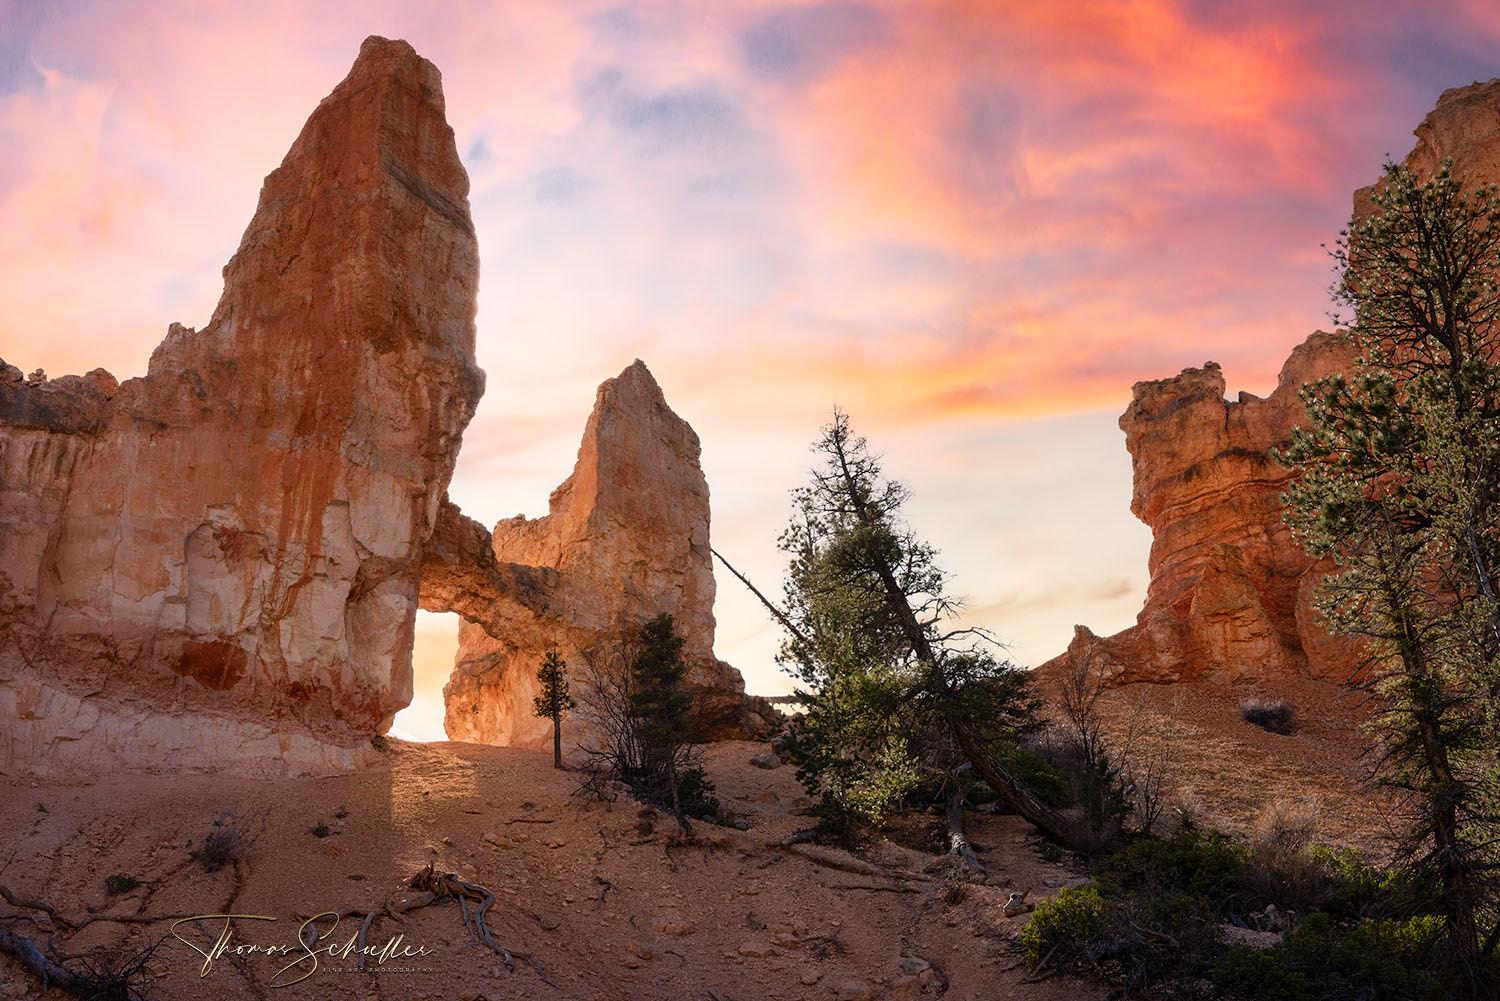 Tower Bridge is one of Bryce Canyons prettiest natural Arches photographed against a high-desert sunset sky | Limited Edition Fine Art Prints 